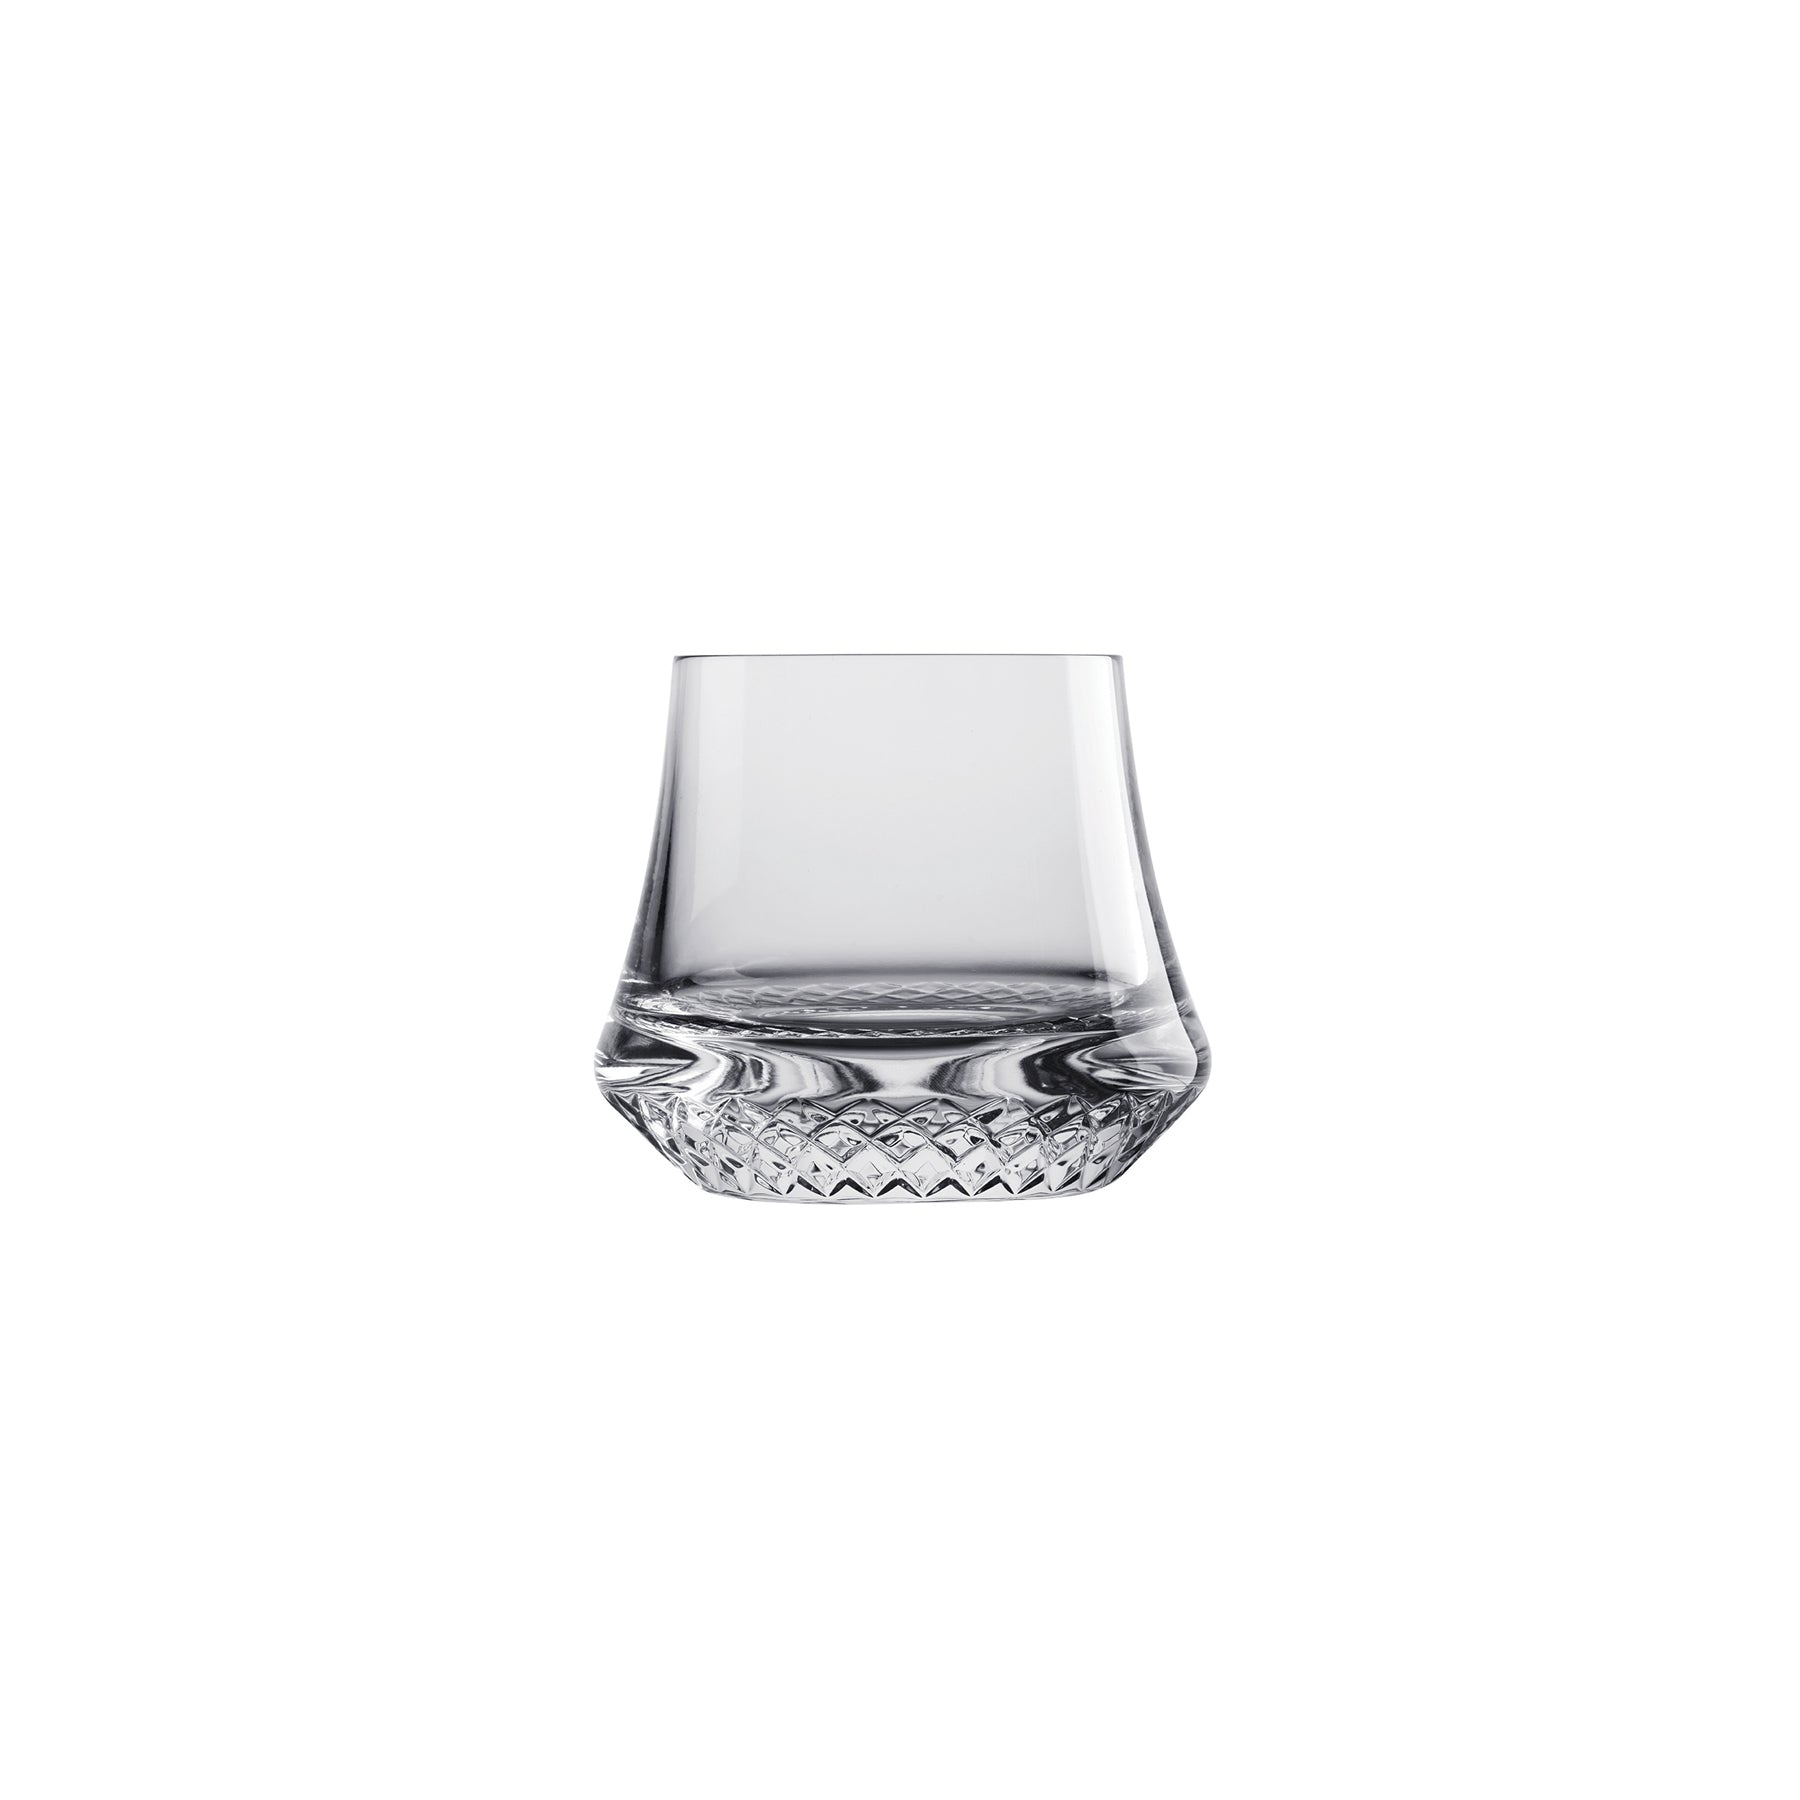 NUDE Paris whisky glass SOF, presented empty on a white background